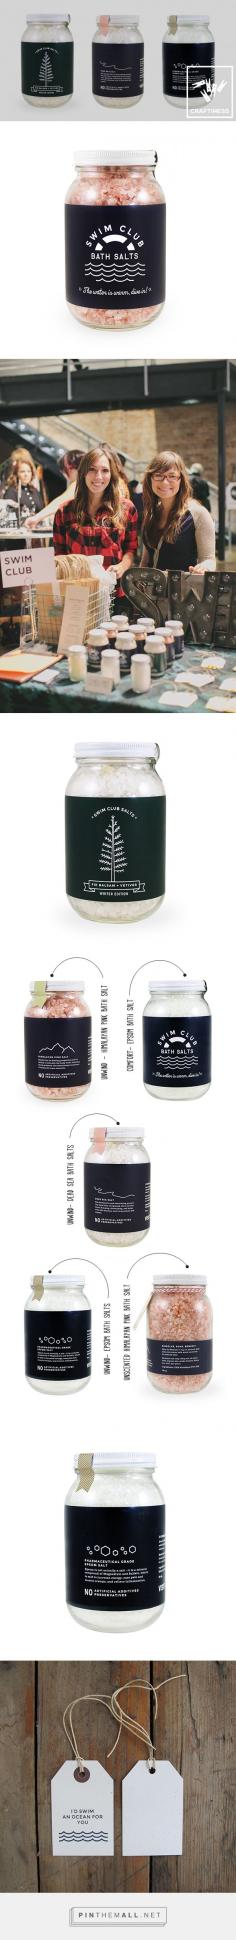 
                    
                        Sooth Your Soul with Swim Club Bath Salts via IAMTHELAB curated by Packaging Diva PD. Handmade bath salts on clever packaging.
                    
                